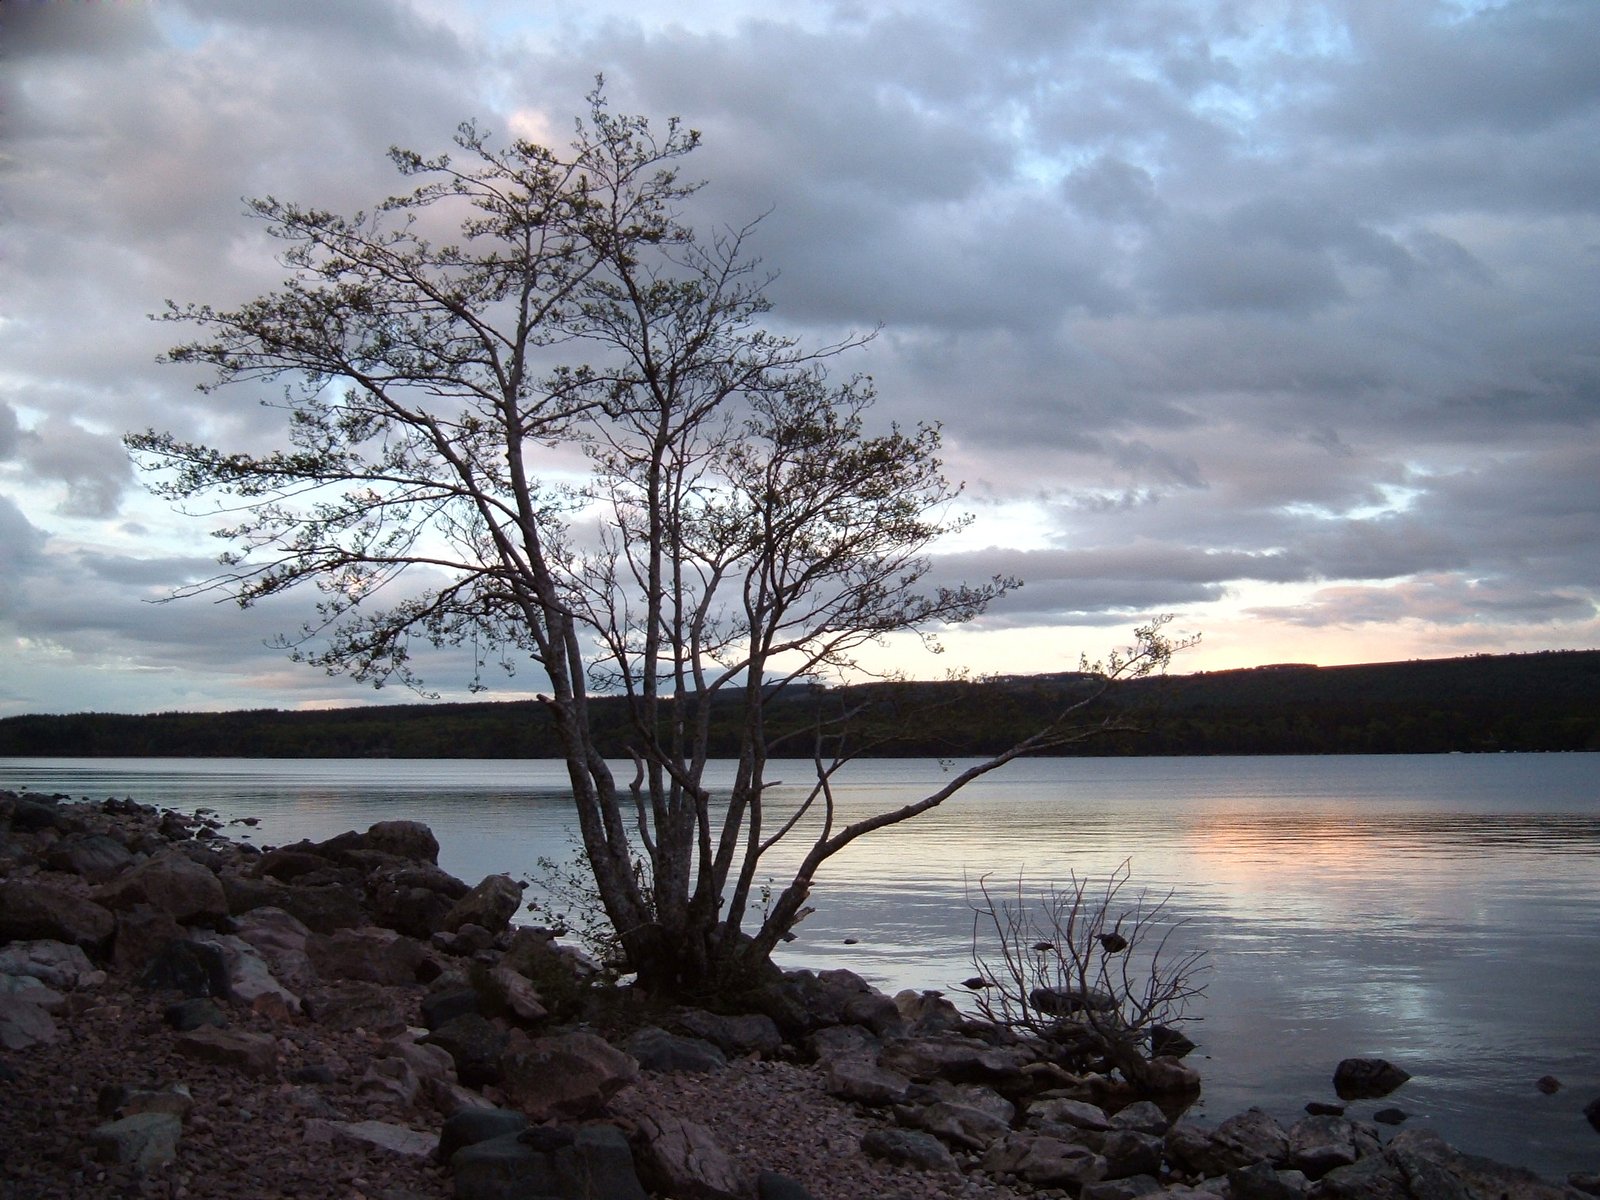 a lone tree on a rock bank beside a body of water